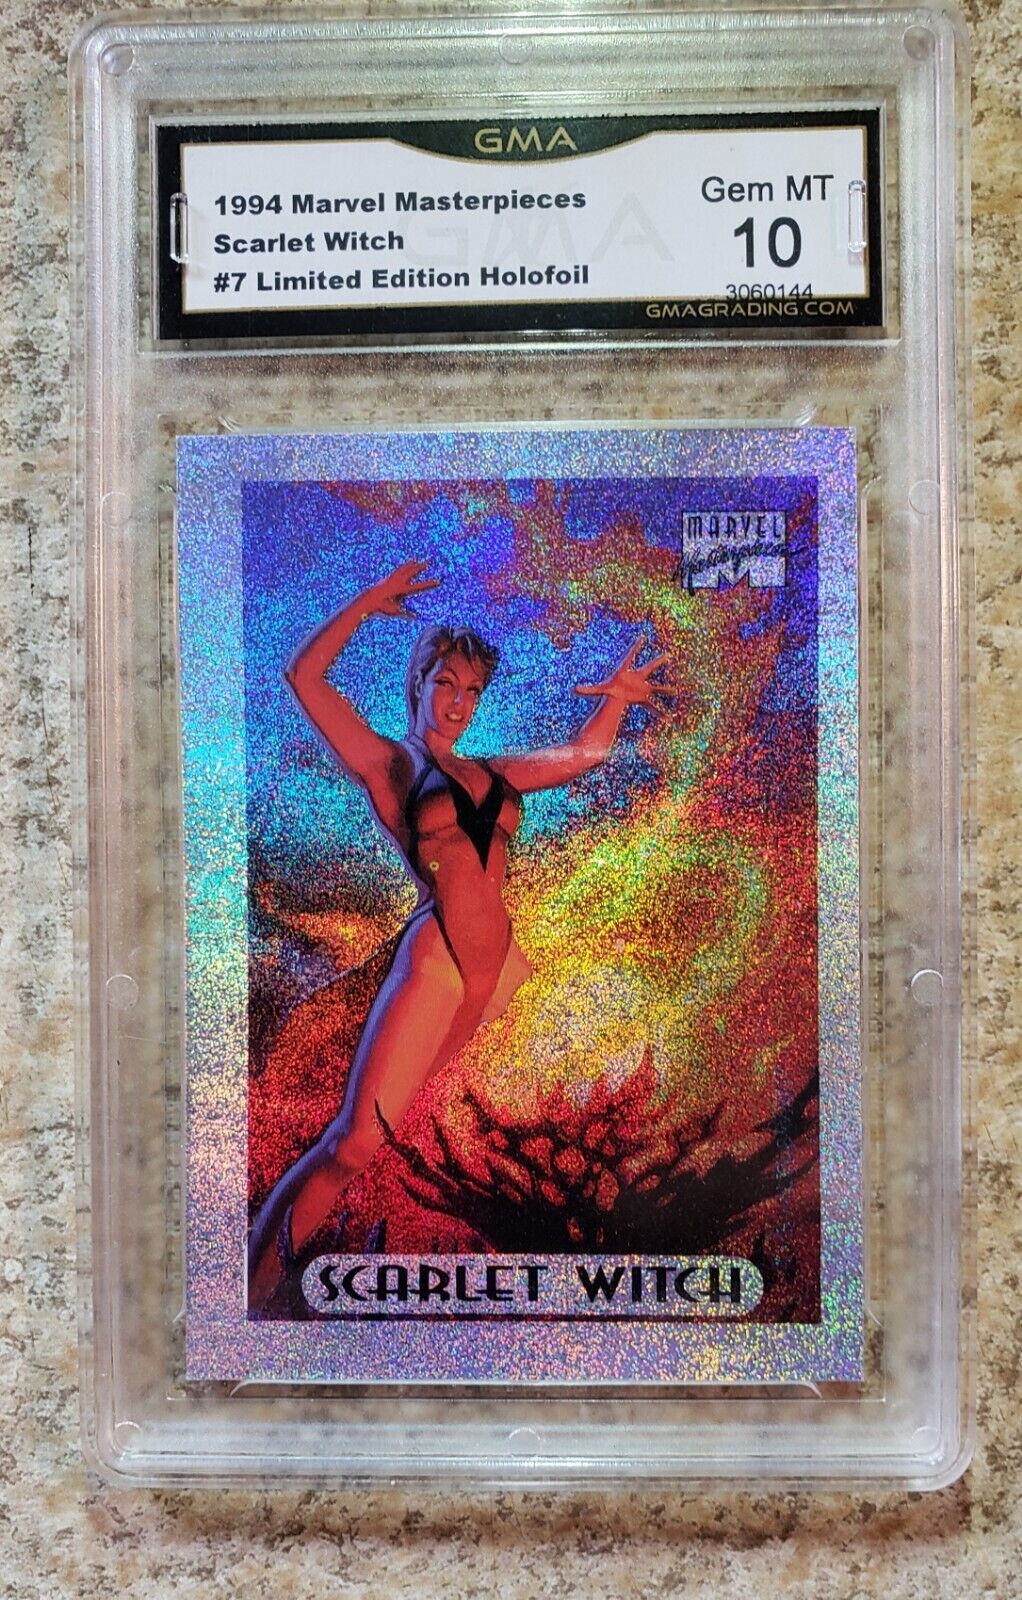 1994 Marvel Masterpieces, Scarlet Witch Silver Holofoil, GMA 10.